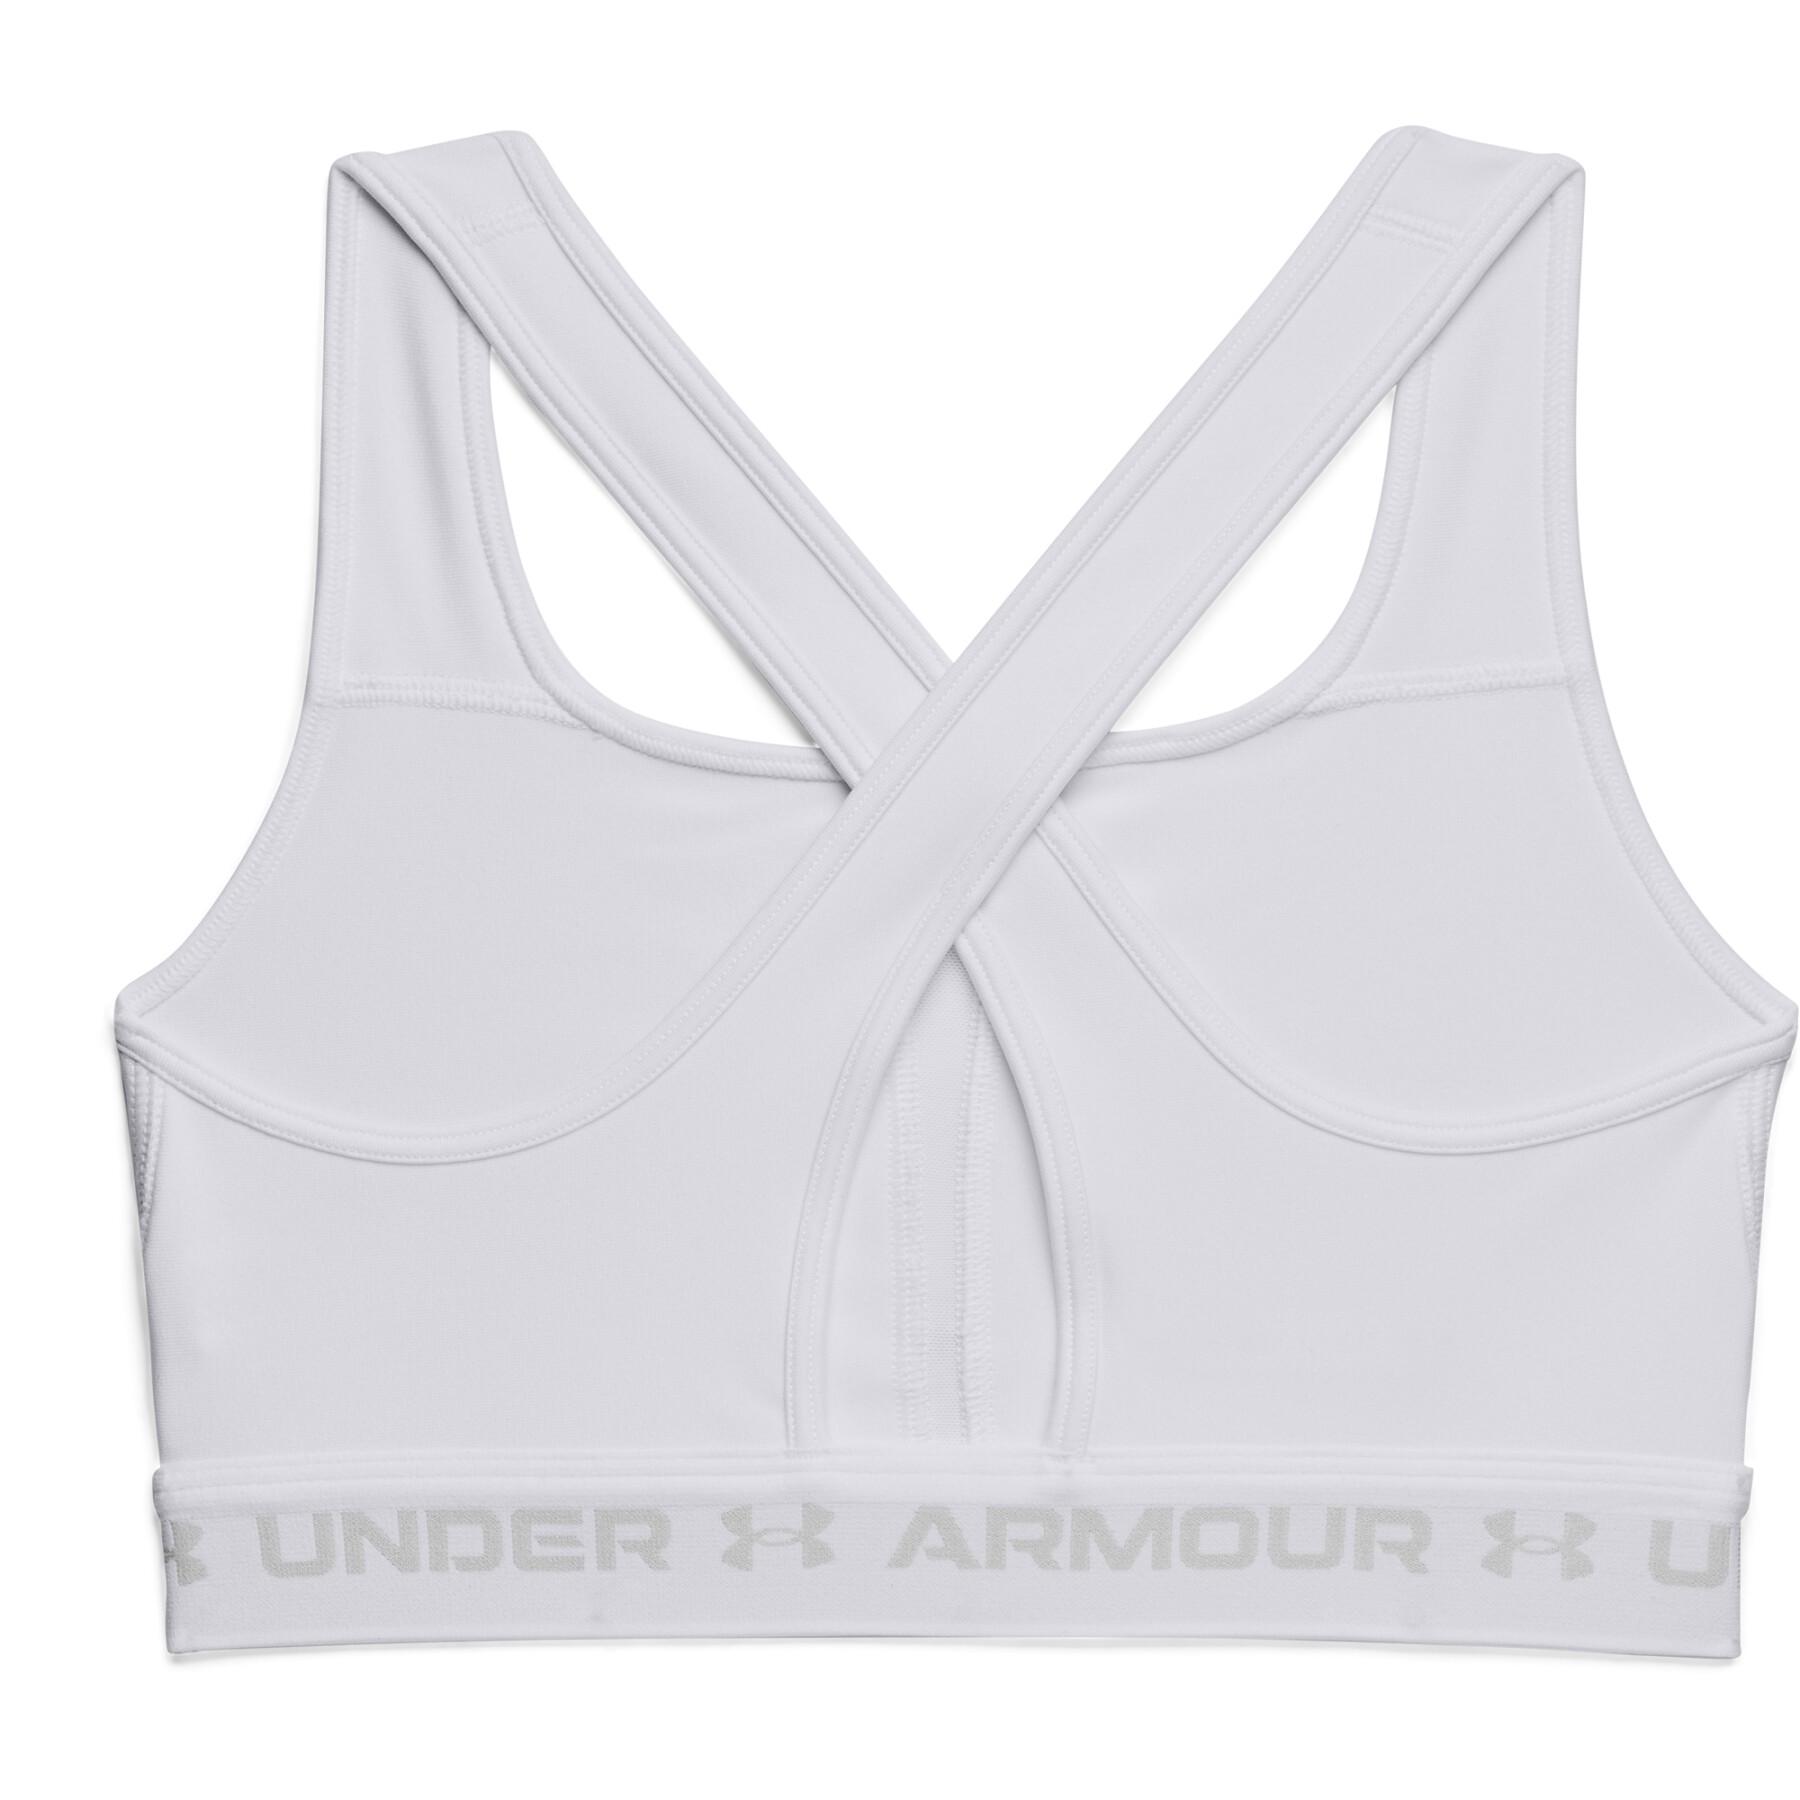 Women's moderate support sports bra Under Armour® Crossback - Sports bras -  under armour boys select backpack - Women's wear - Slocog wear